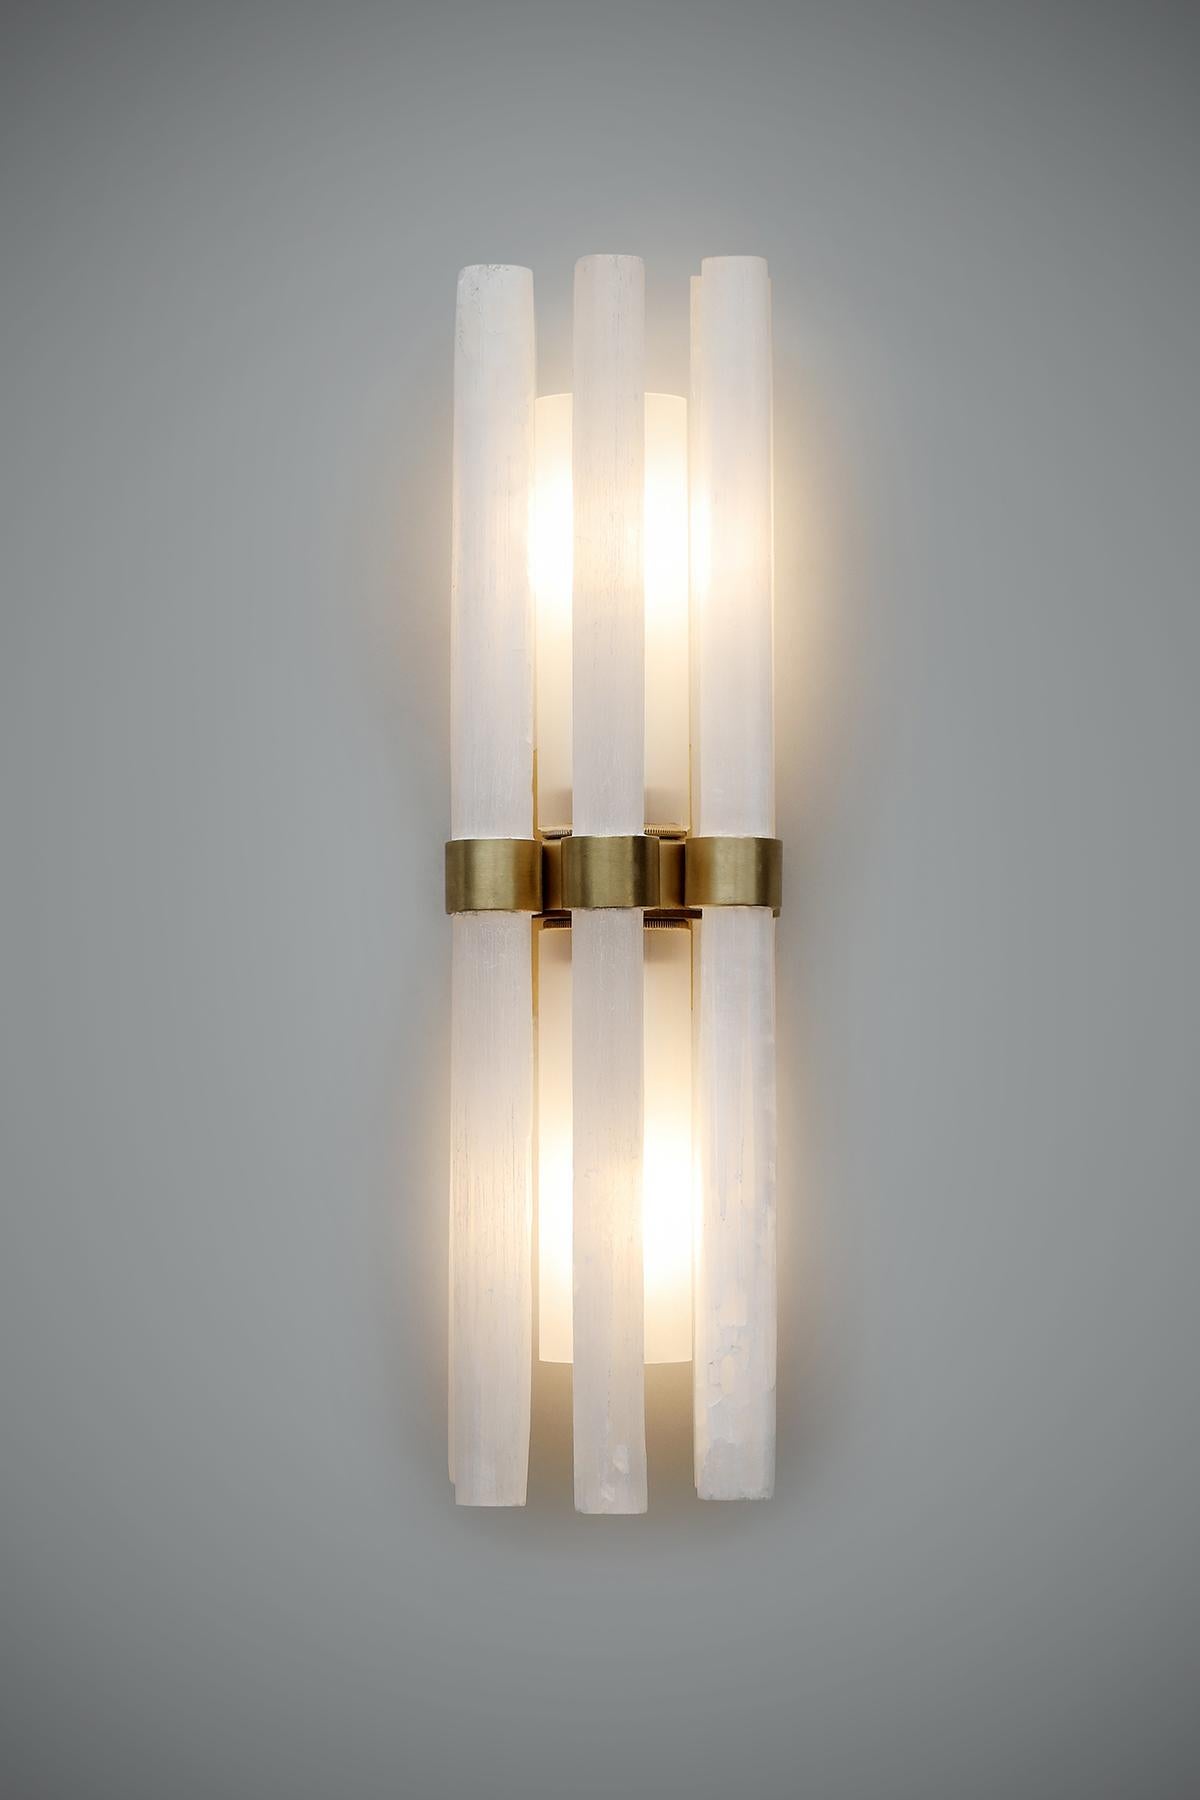 Our handcrafted Katz Wall Light adds contemporary sophistication to any room. Using rock crystal rods to surround the light, it create a beautiful glow. Boasting clean lines and a structured shape it is created using hand-crafted bronze to gently